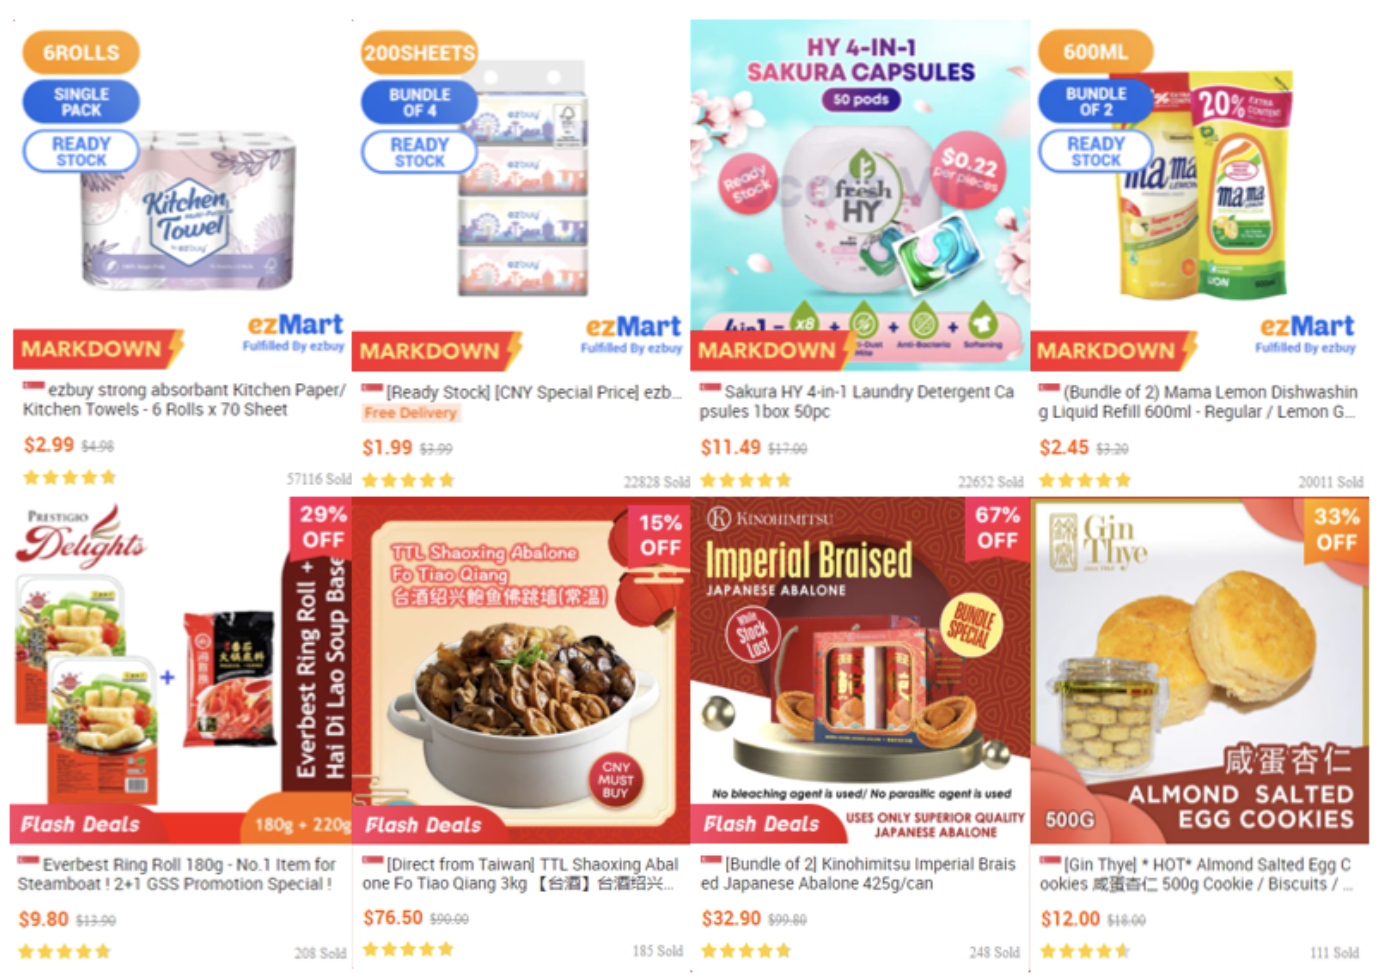 Cheap Cheap CNY Drinks in SG – Ezbuy Biggest Online Warehouse Sale with Free Home Delivery! - 9